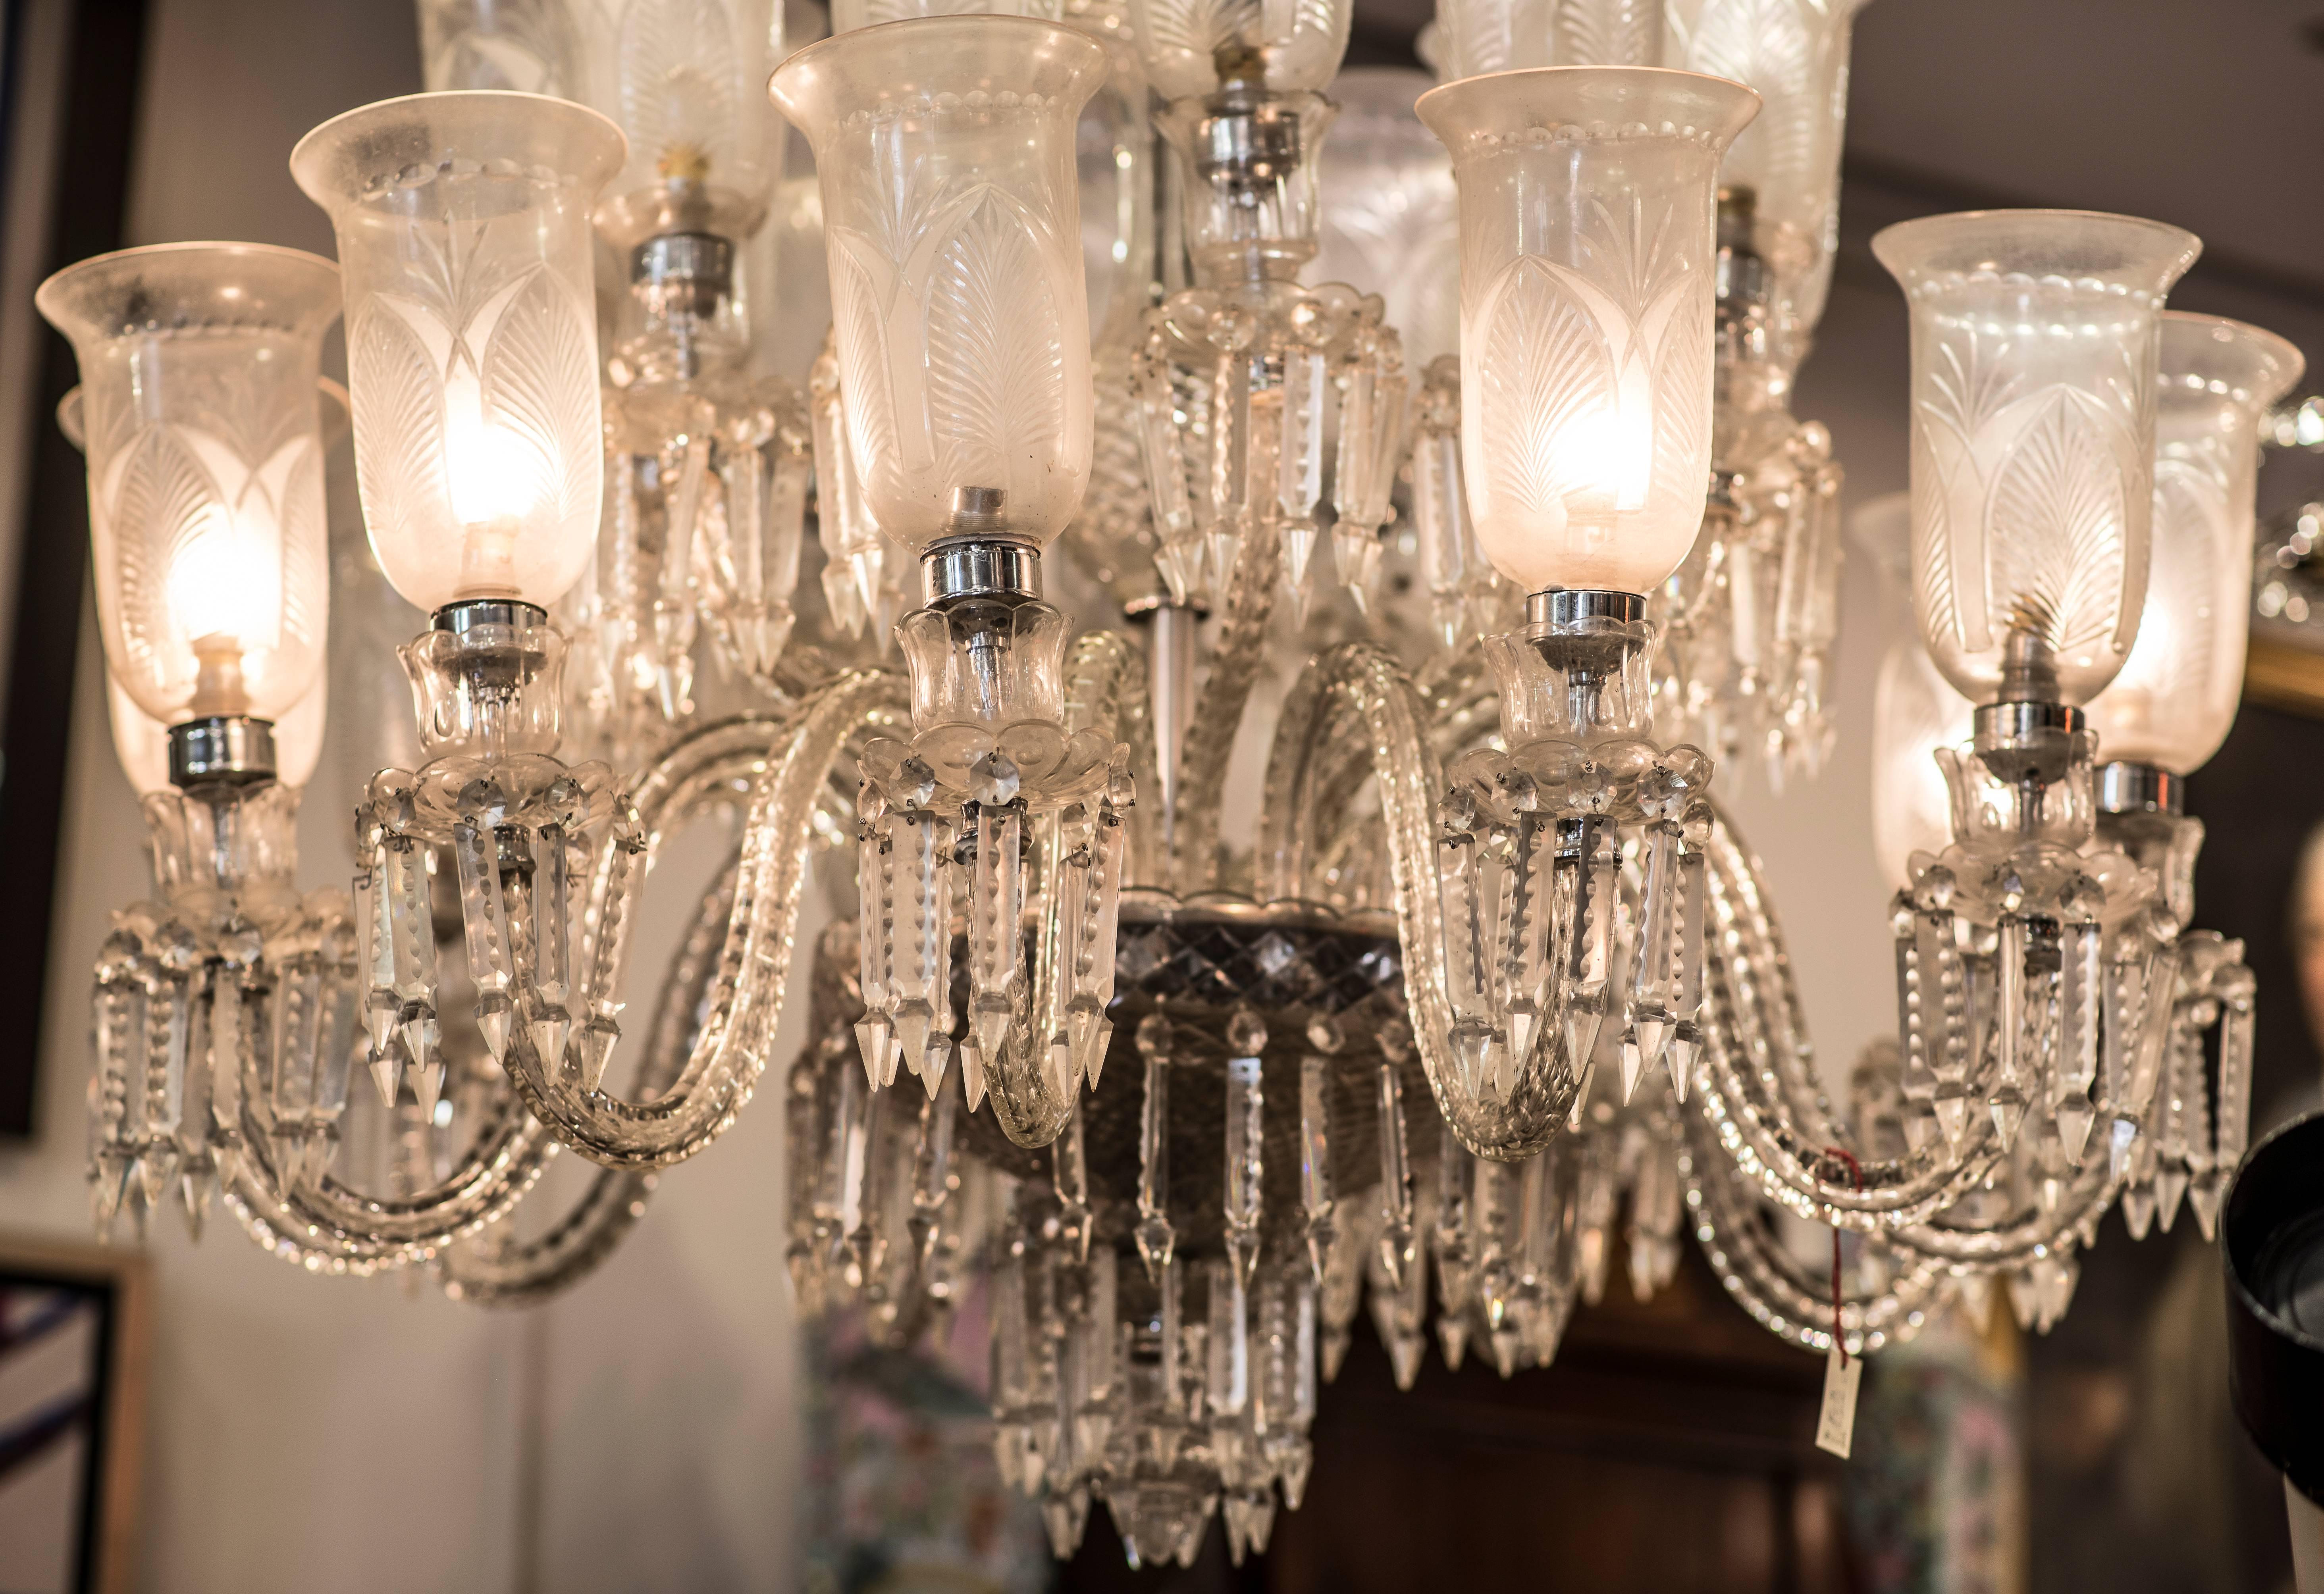 Impressive and unusual crystal carved chandelier in the style of Louis XV. With 24 lights. French crystal with floral design